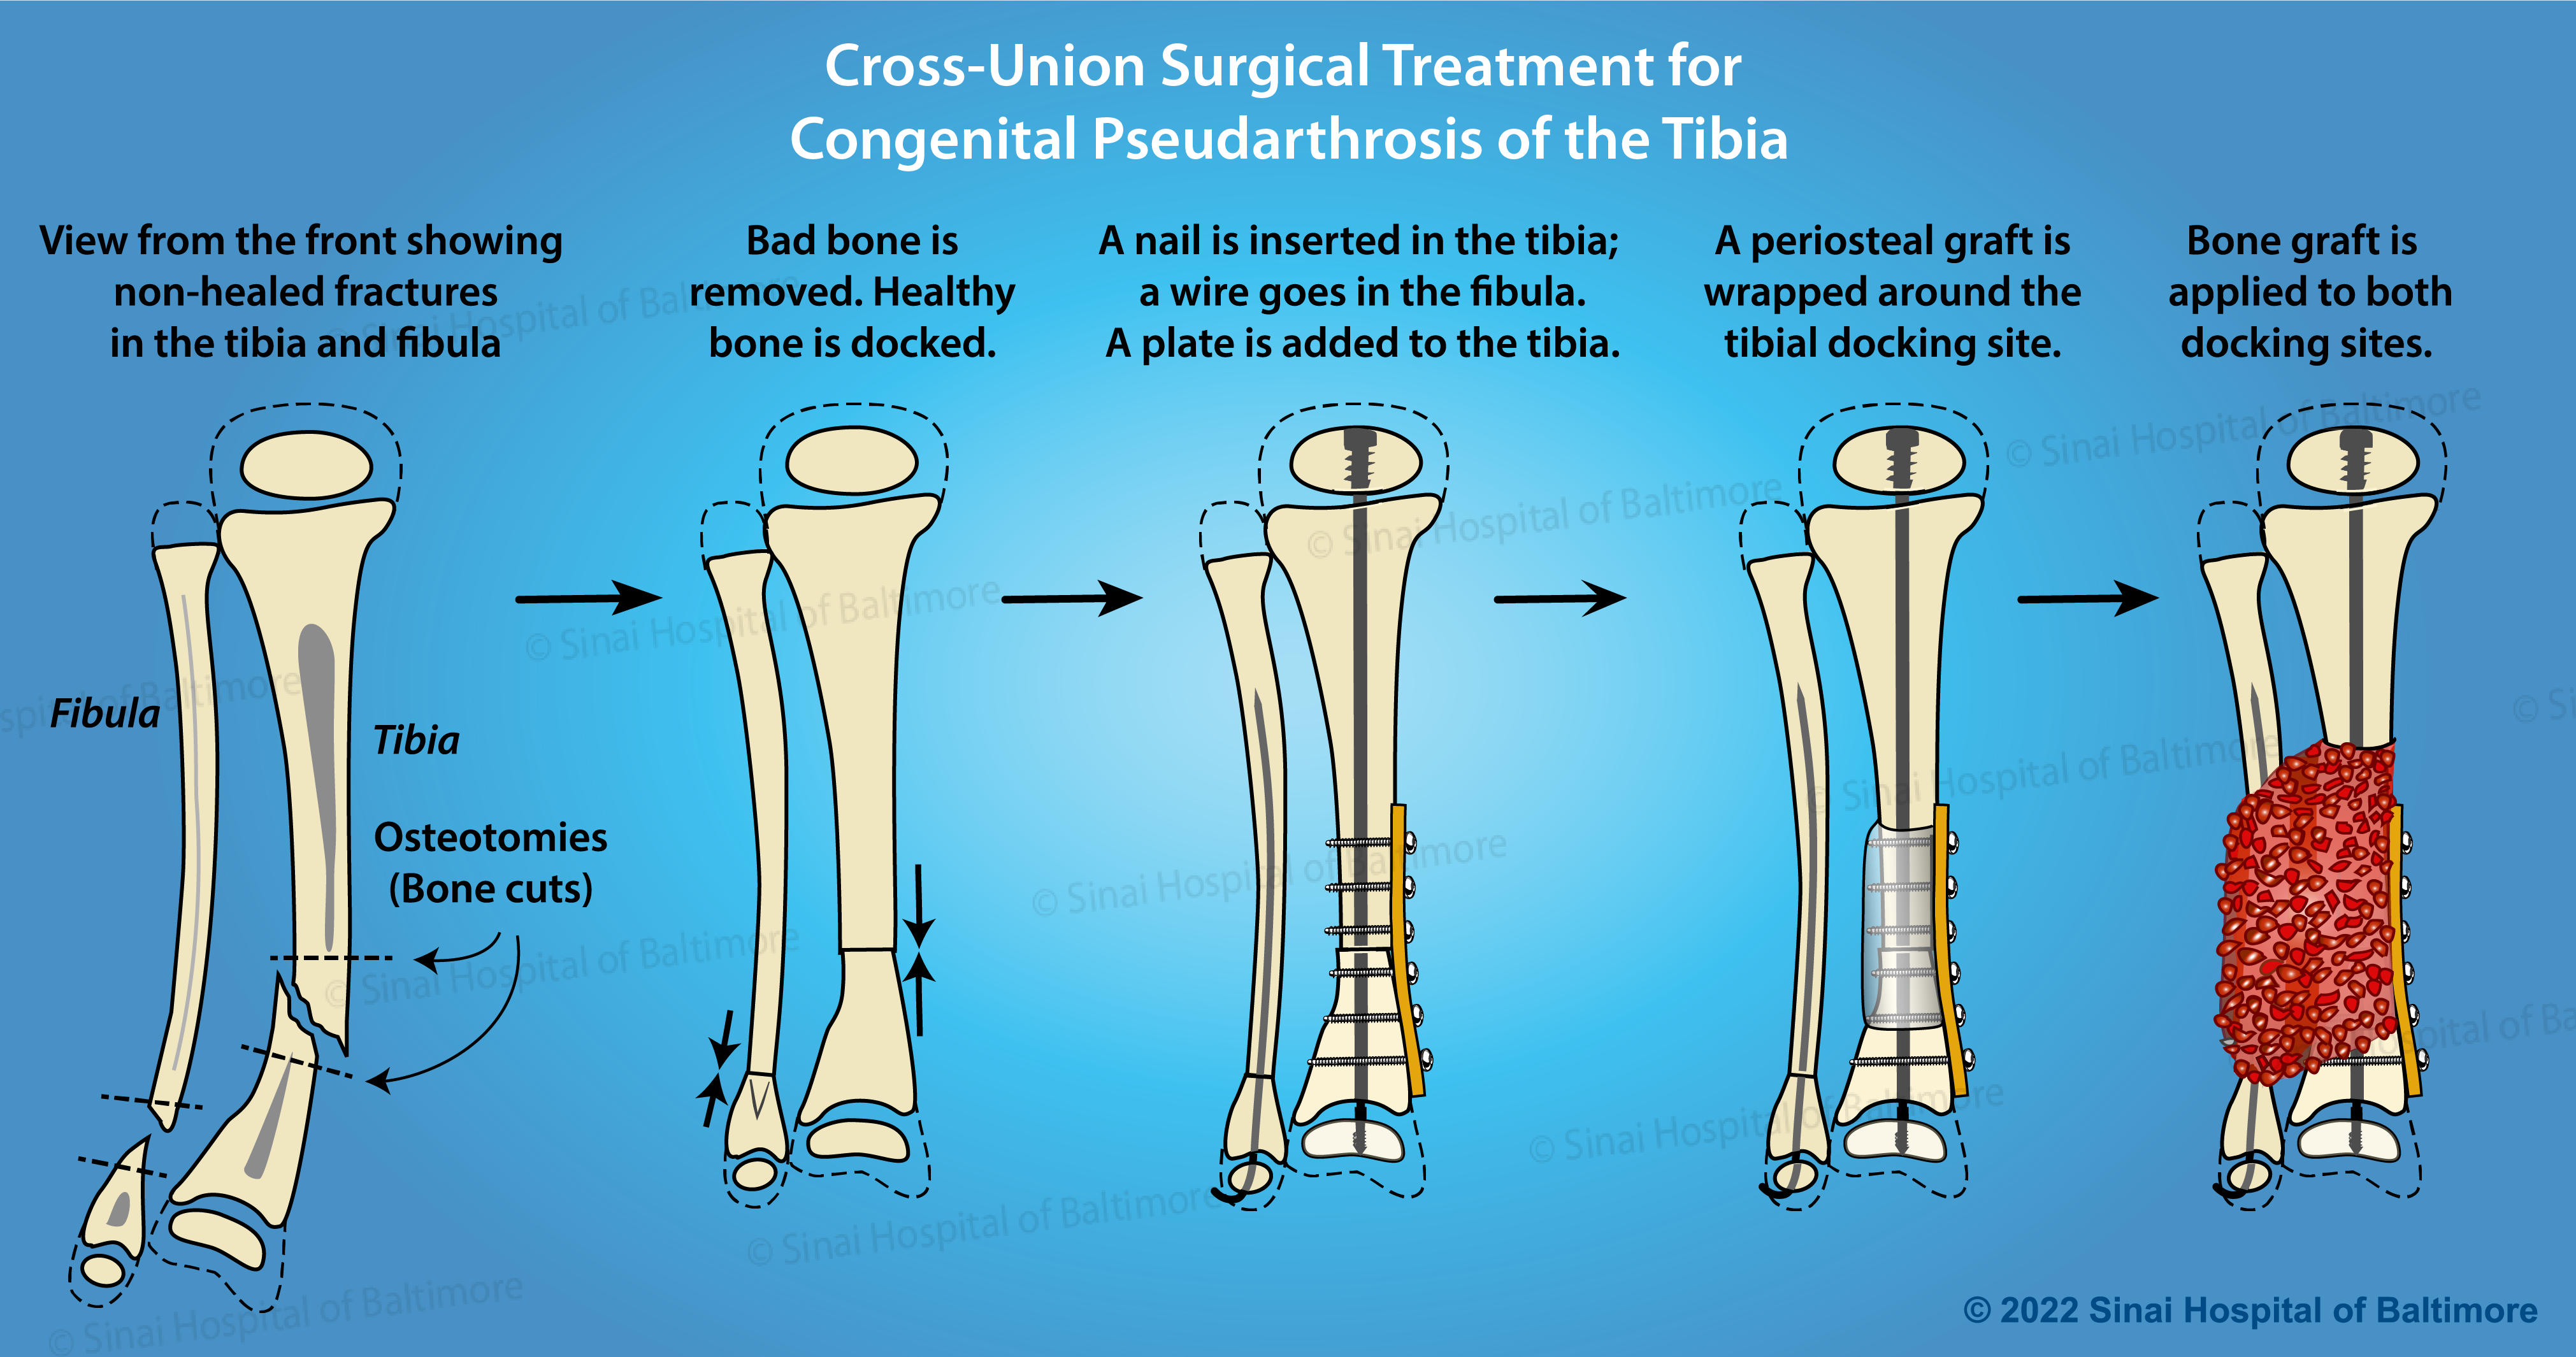 Color illustrations depicting cross-union surgical treatment of congenital pseudarthrosis of the tibia with internal hardware, periosteal graft, bone graft, plate and nail: View from the front showing non-healed fractures. Bad bone is removed. Healthy bone is docked. A nail is inserted in the tibia; a wire goes in the fibula. A plate is added to the tibia. A periosteal graft is wrapped around the tibial docking site. Bone graft is applied to both docking sites.